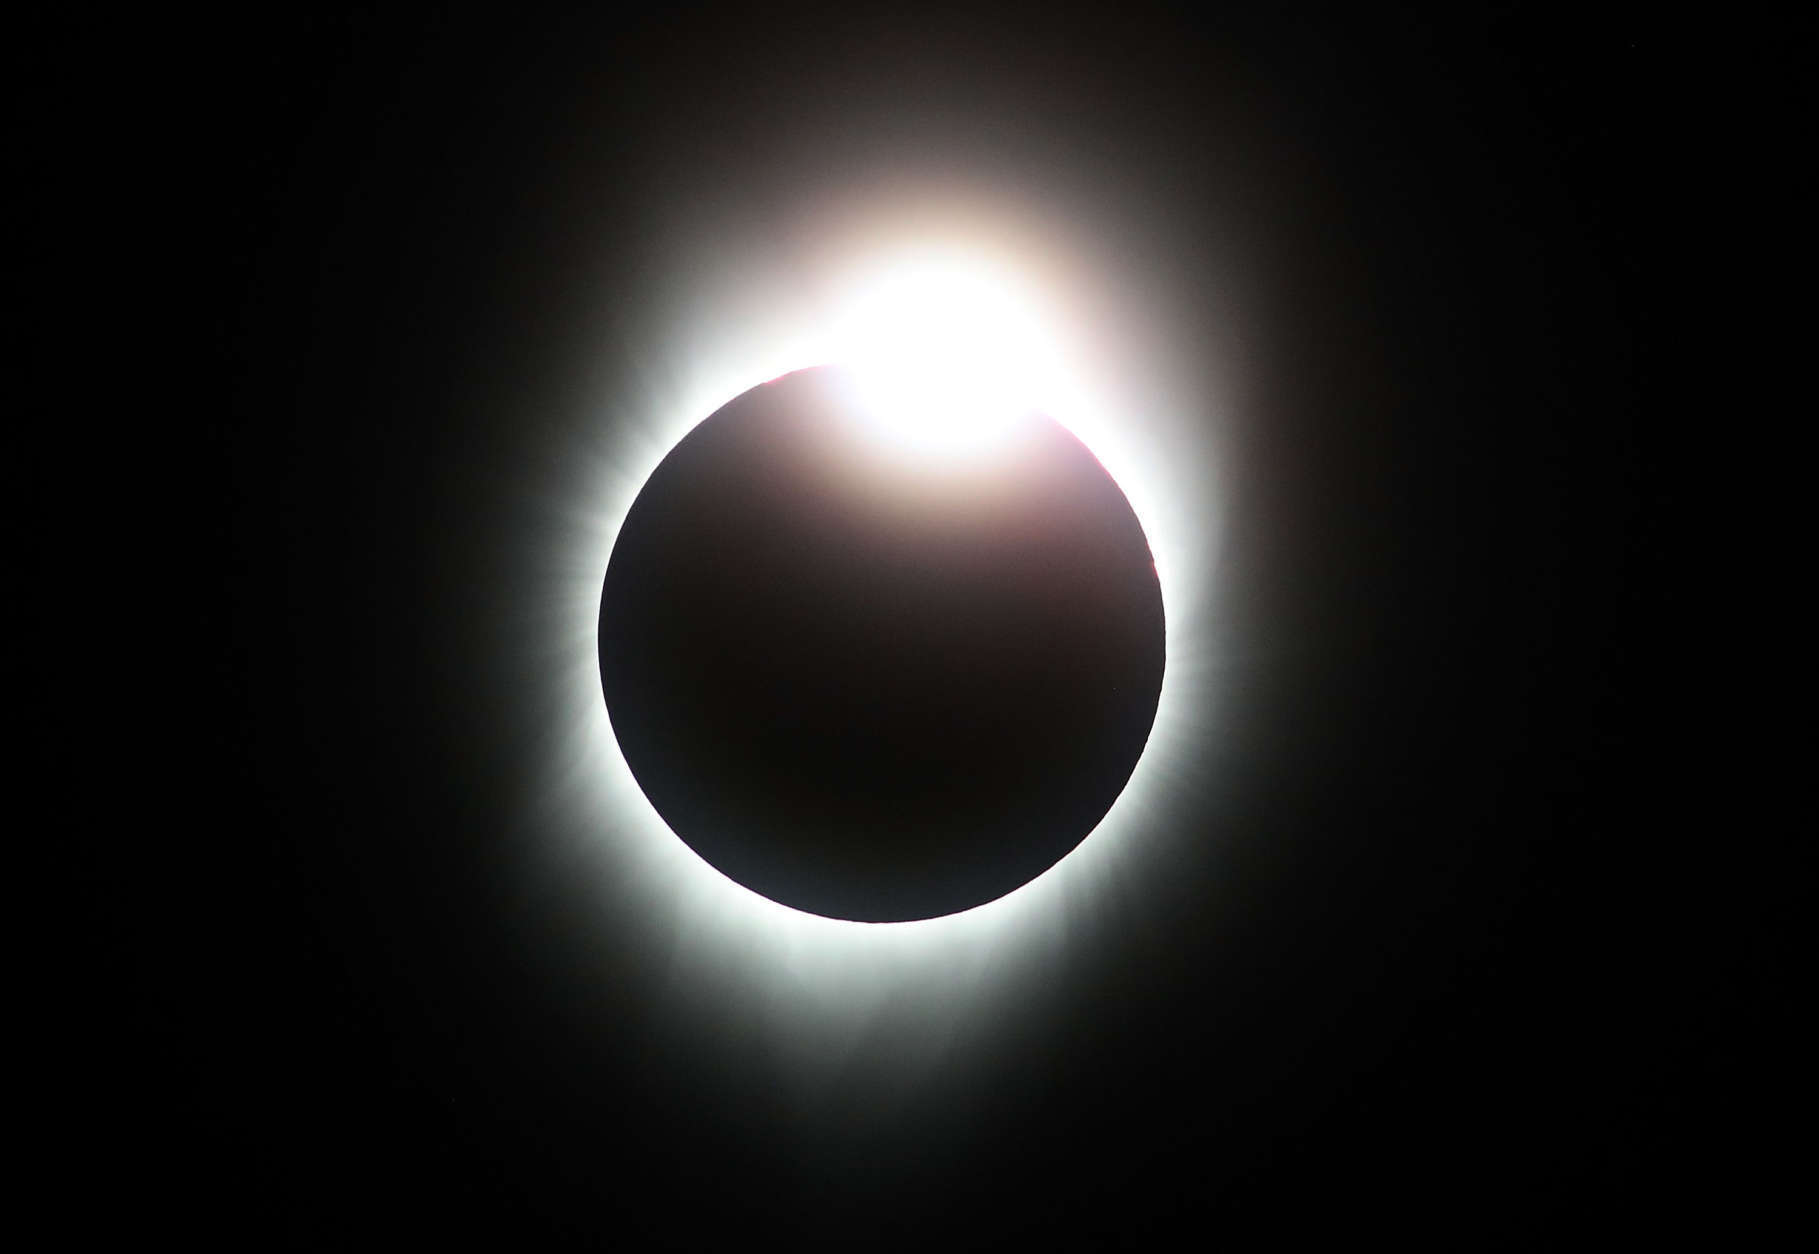 CASPER, WY - AUGUST 21:  A total eclipse with the 'diamond ring' effect is seen from South Mike Sedar Park on August 21, 2017 in Casper, Wyoming.  Millions of people have flocked to areas of the U.S. that are in the "path of totality" in order to experience a total solar eclipse. During the event, the moon will pass in between the sun and the Earth, appearing to block the sun.  (Photo by Justin Sullivan/Getty Images)